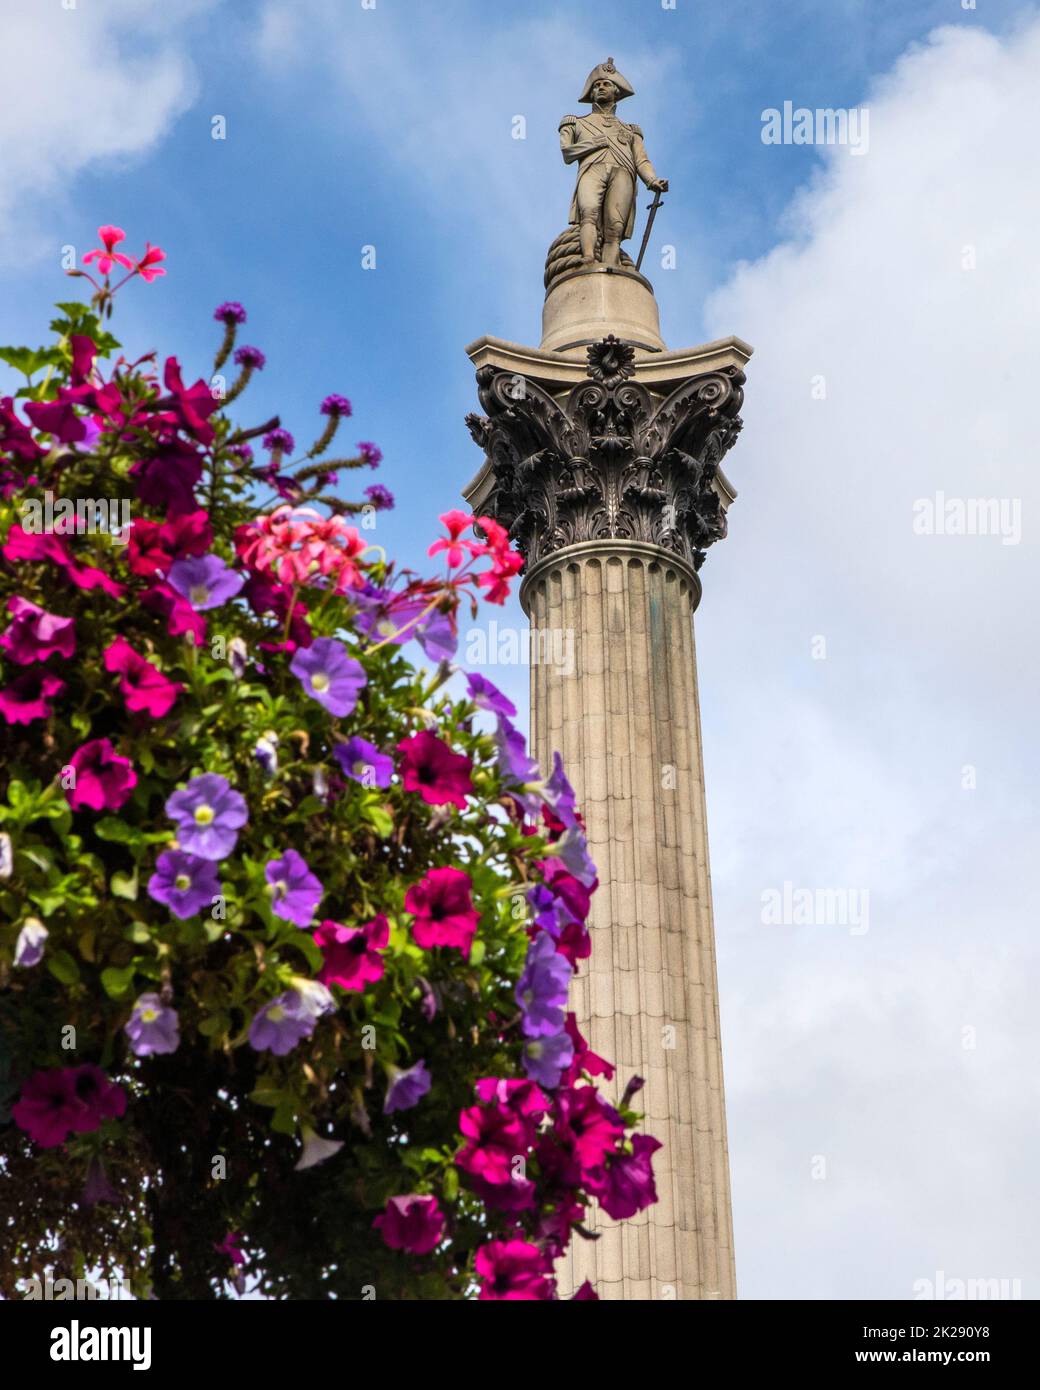 A view of the magnificent Nelsons Column, at Trafalgar Square in London, UK. Stock Photo